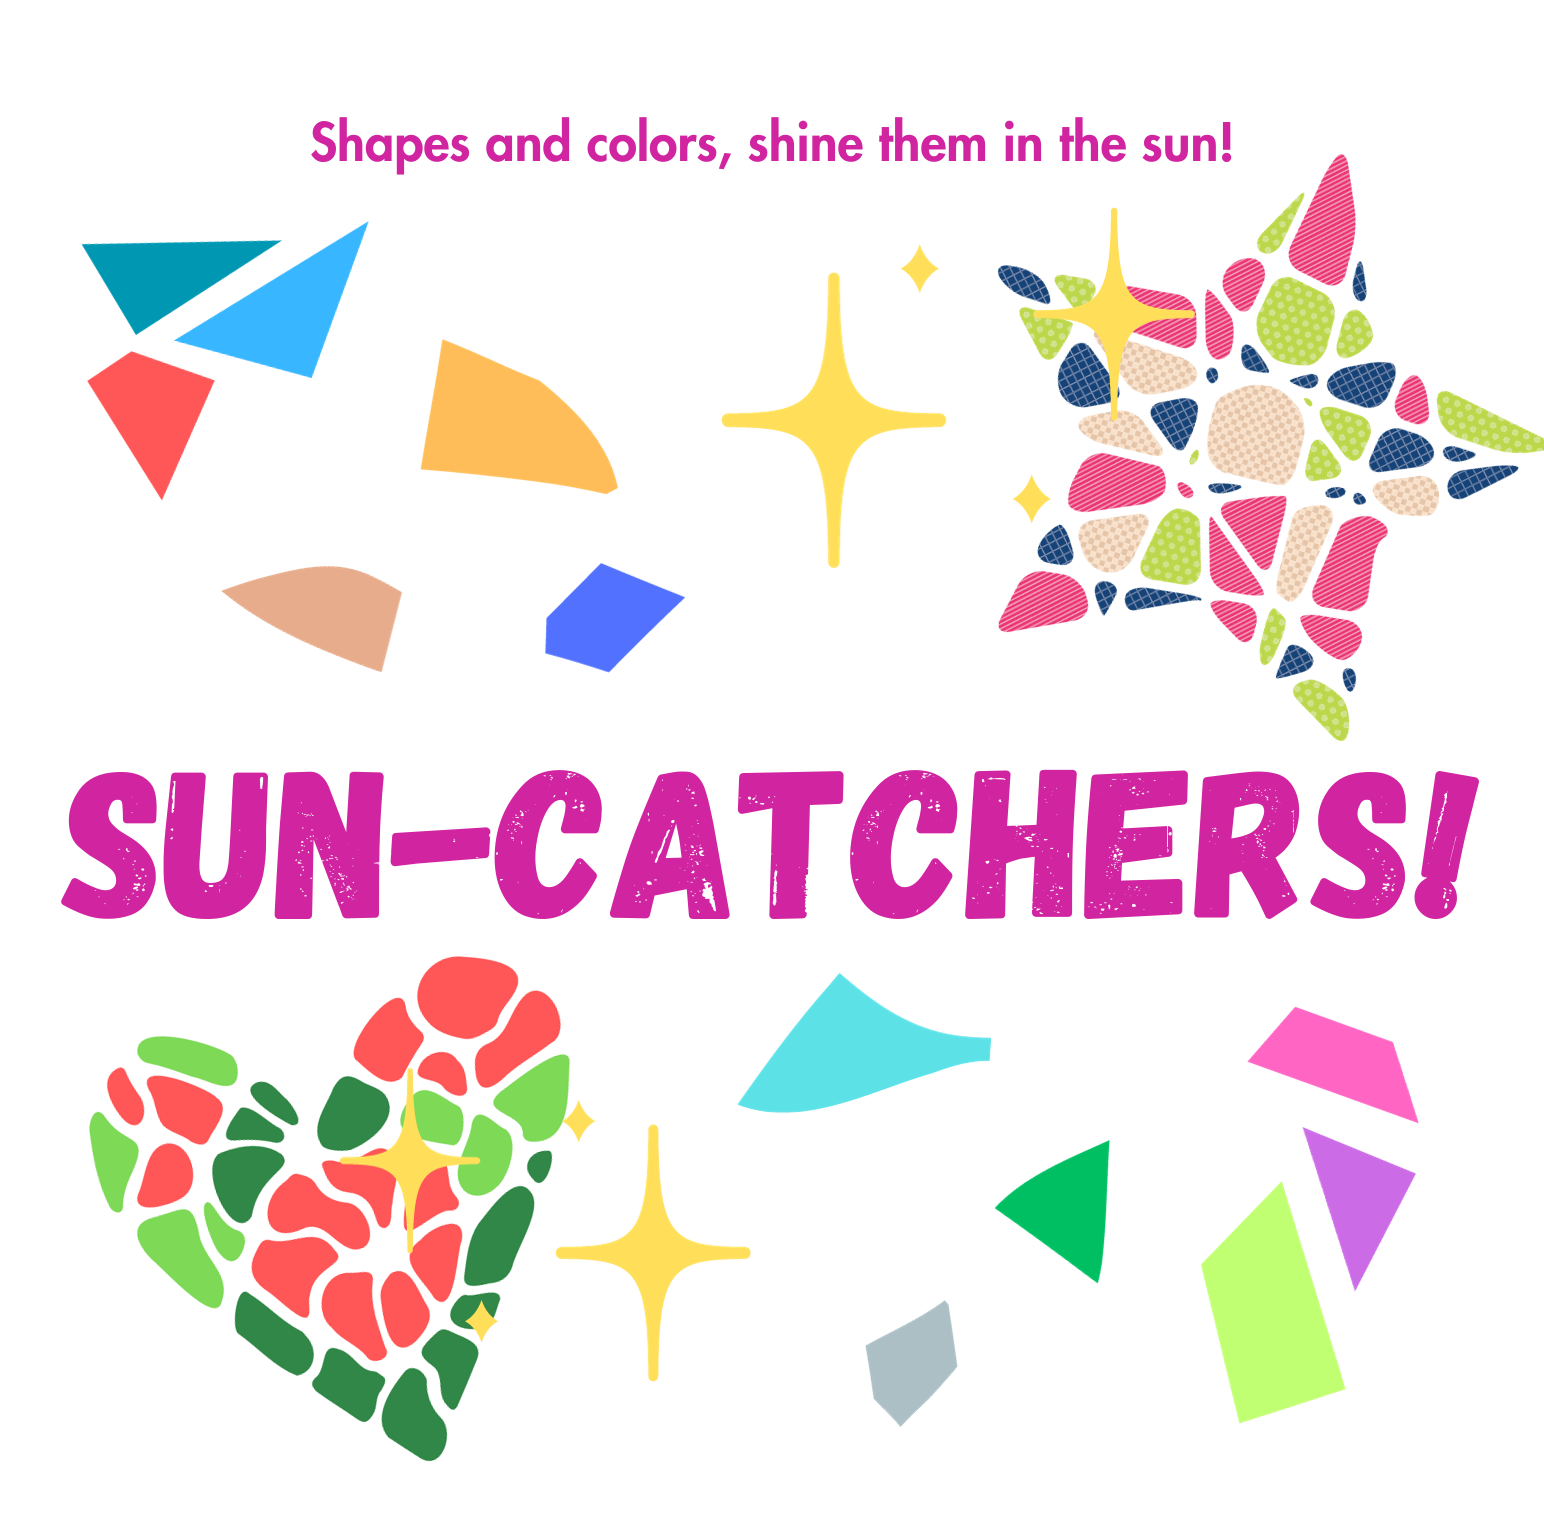 Clip art of various mosaic shards and two shaped like a star and a heart. In the center says "Sun-Catchers!" in large pink letters.